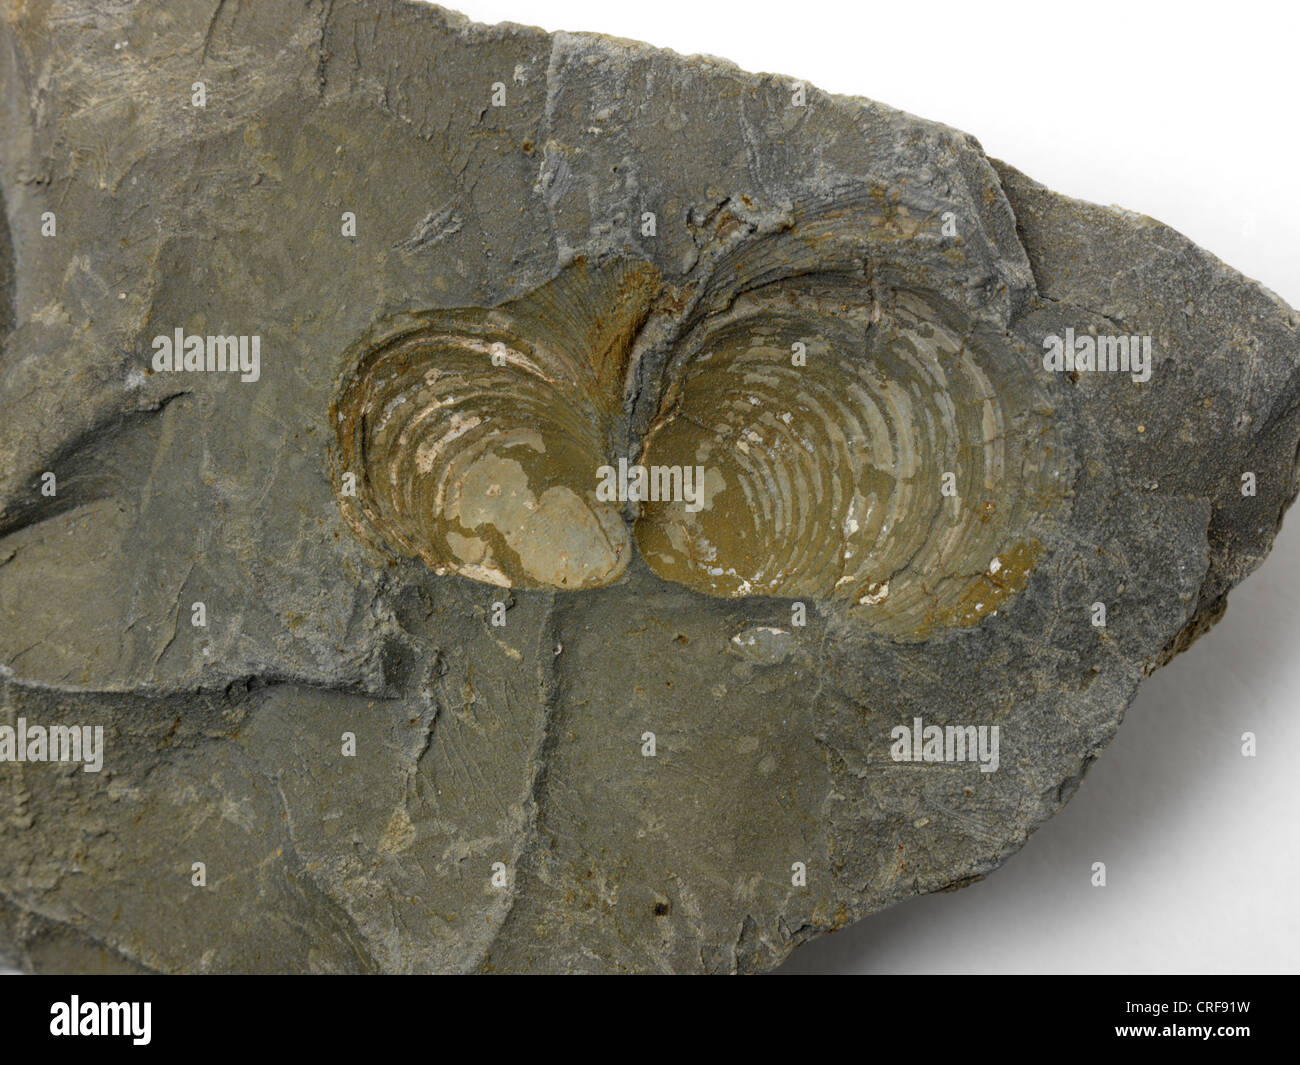 Fossils Of Shells On A Rock Stock Photo